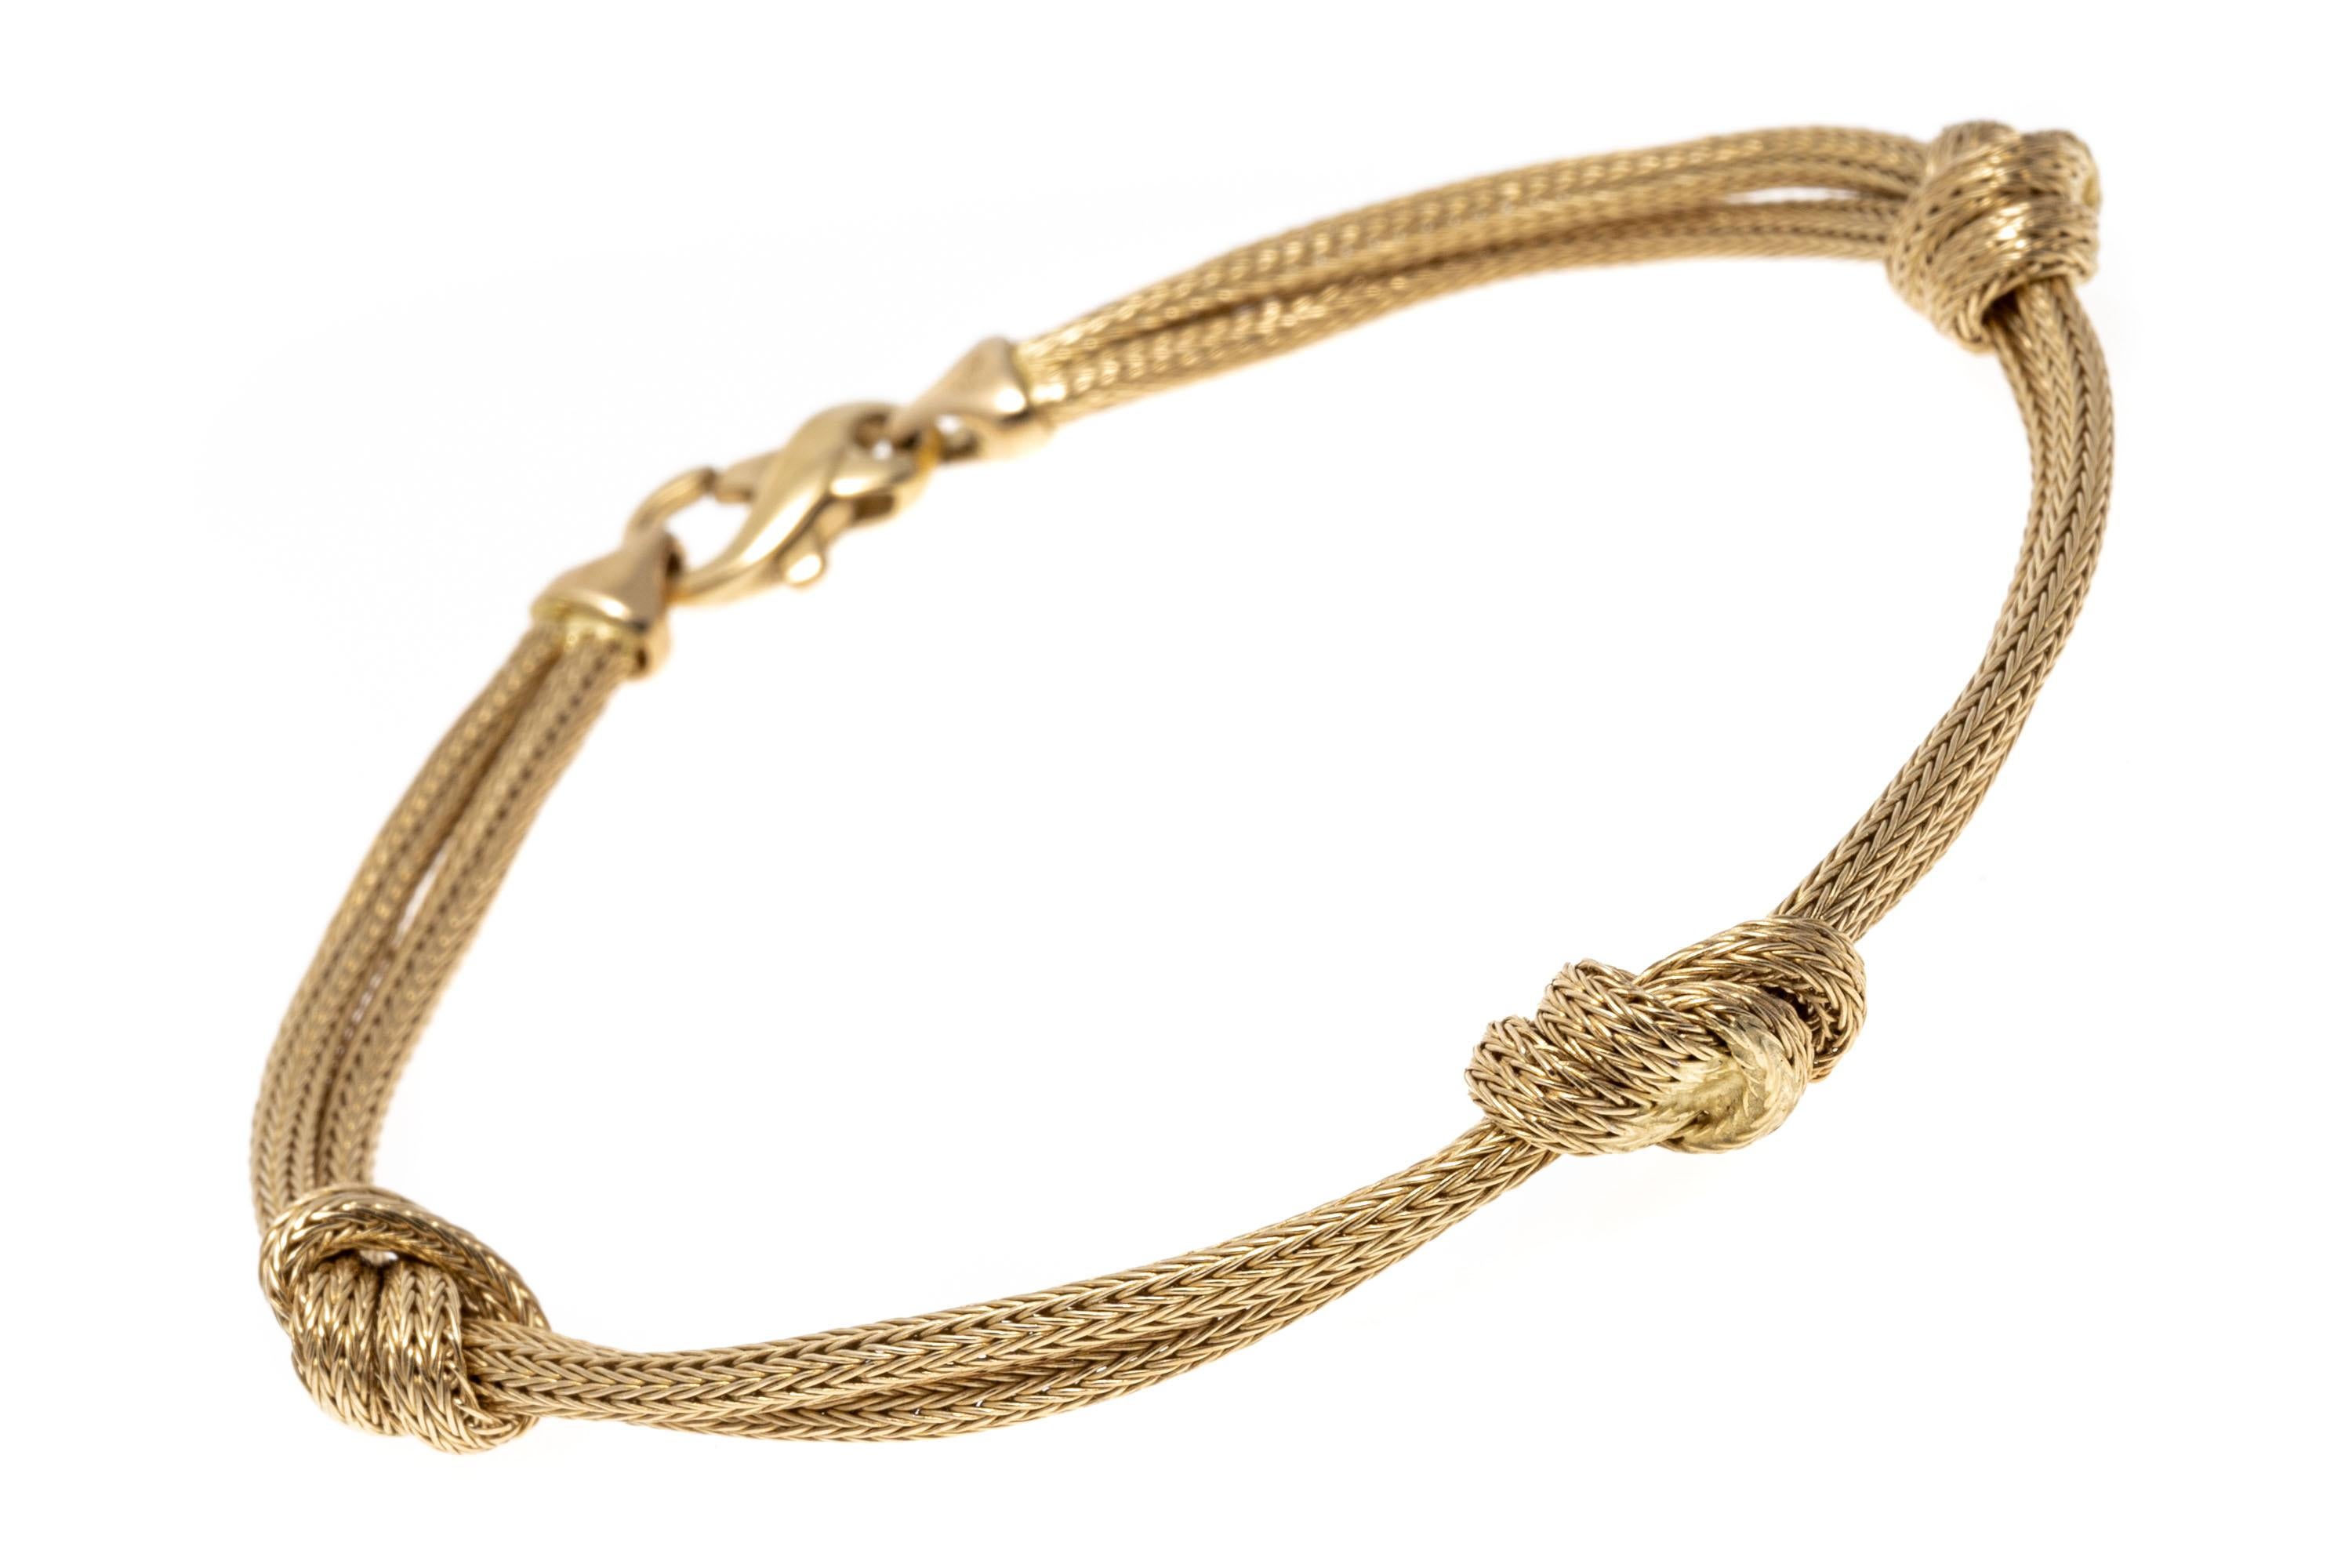 Women's 14K Yellow Gold Knotted Foxtail Style Chain Bracelet